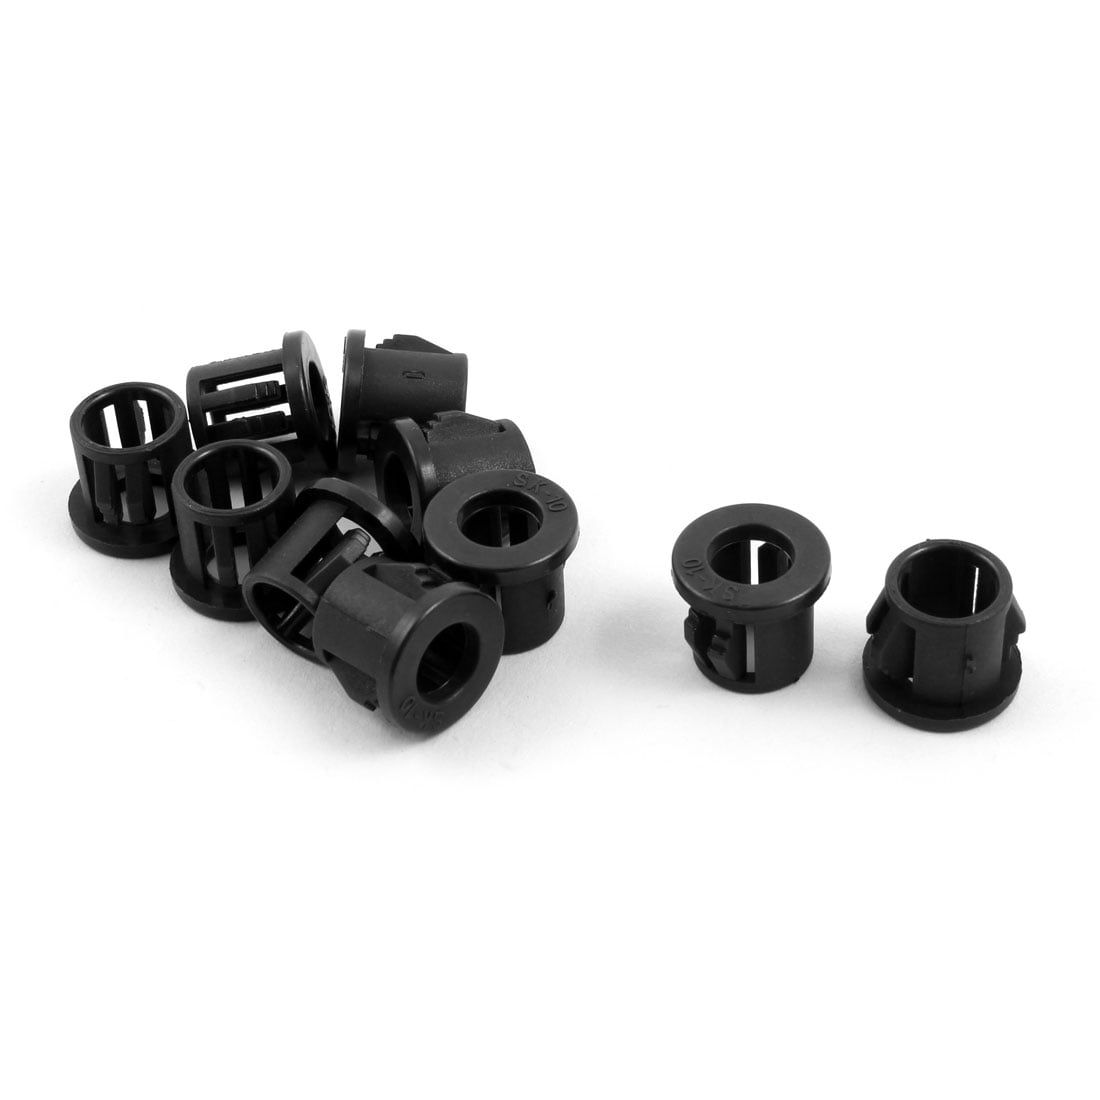 uxcell Hold Plugs,100pcs 8mm Mounted Dia Snap in Cable Hose Bushing Grommet Protector Black